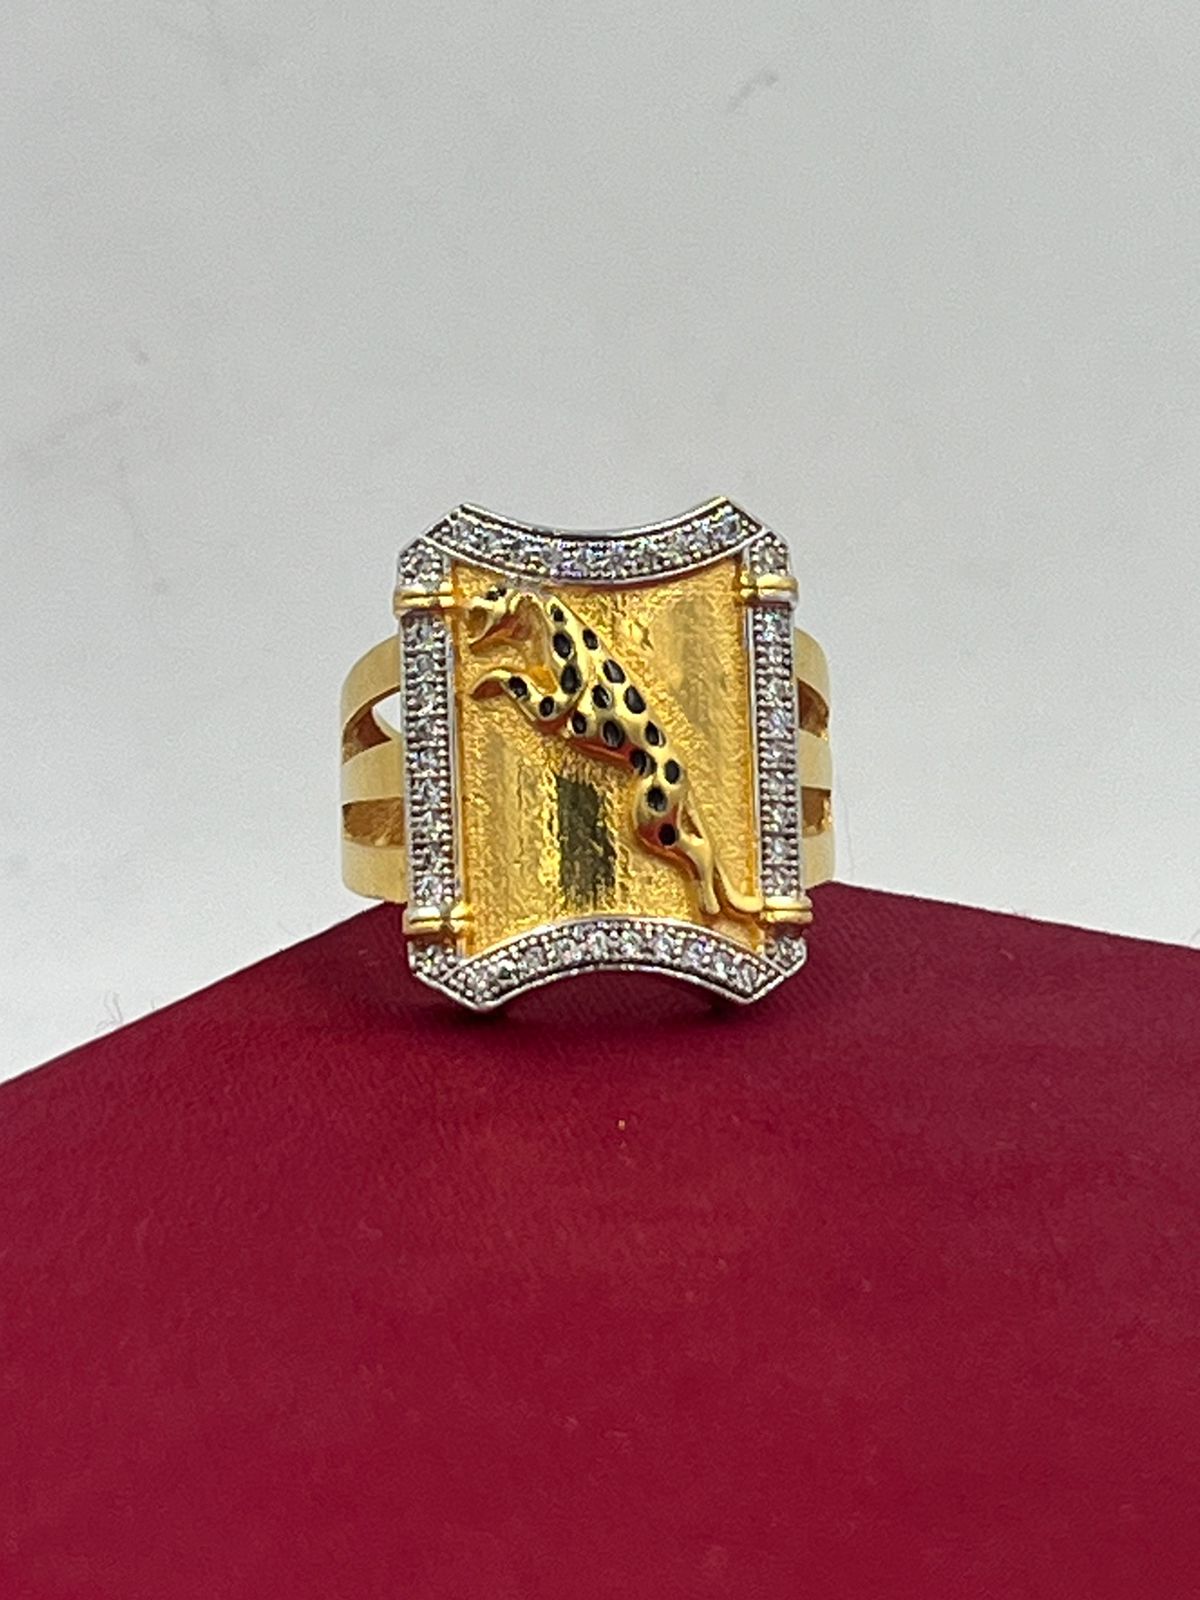 Jaguar Panther Leopard Cubic Zircon Ring, Sterling Silver Ring, Gold Ring  Gift for Her, Leopard Ring, Cheetah Ring, Cat Ring, Rustic Ring - Etsy